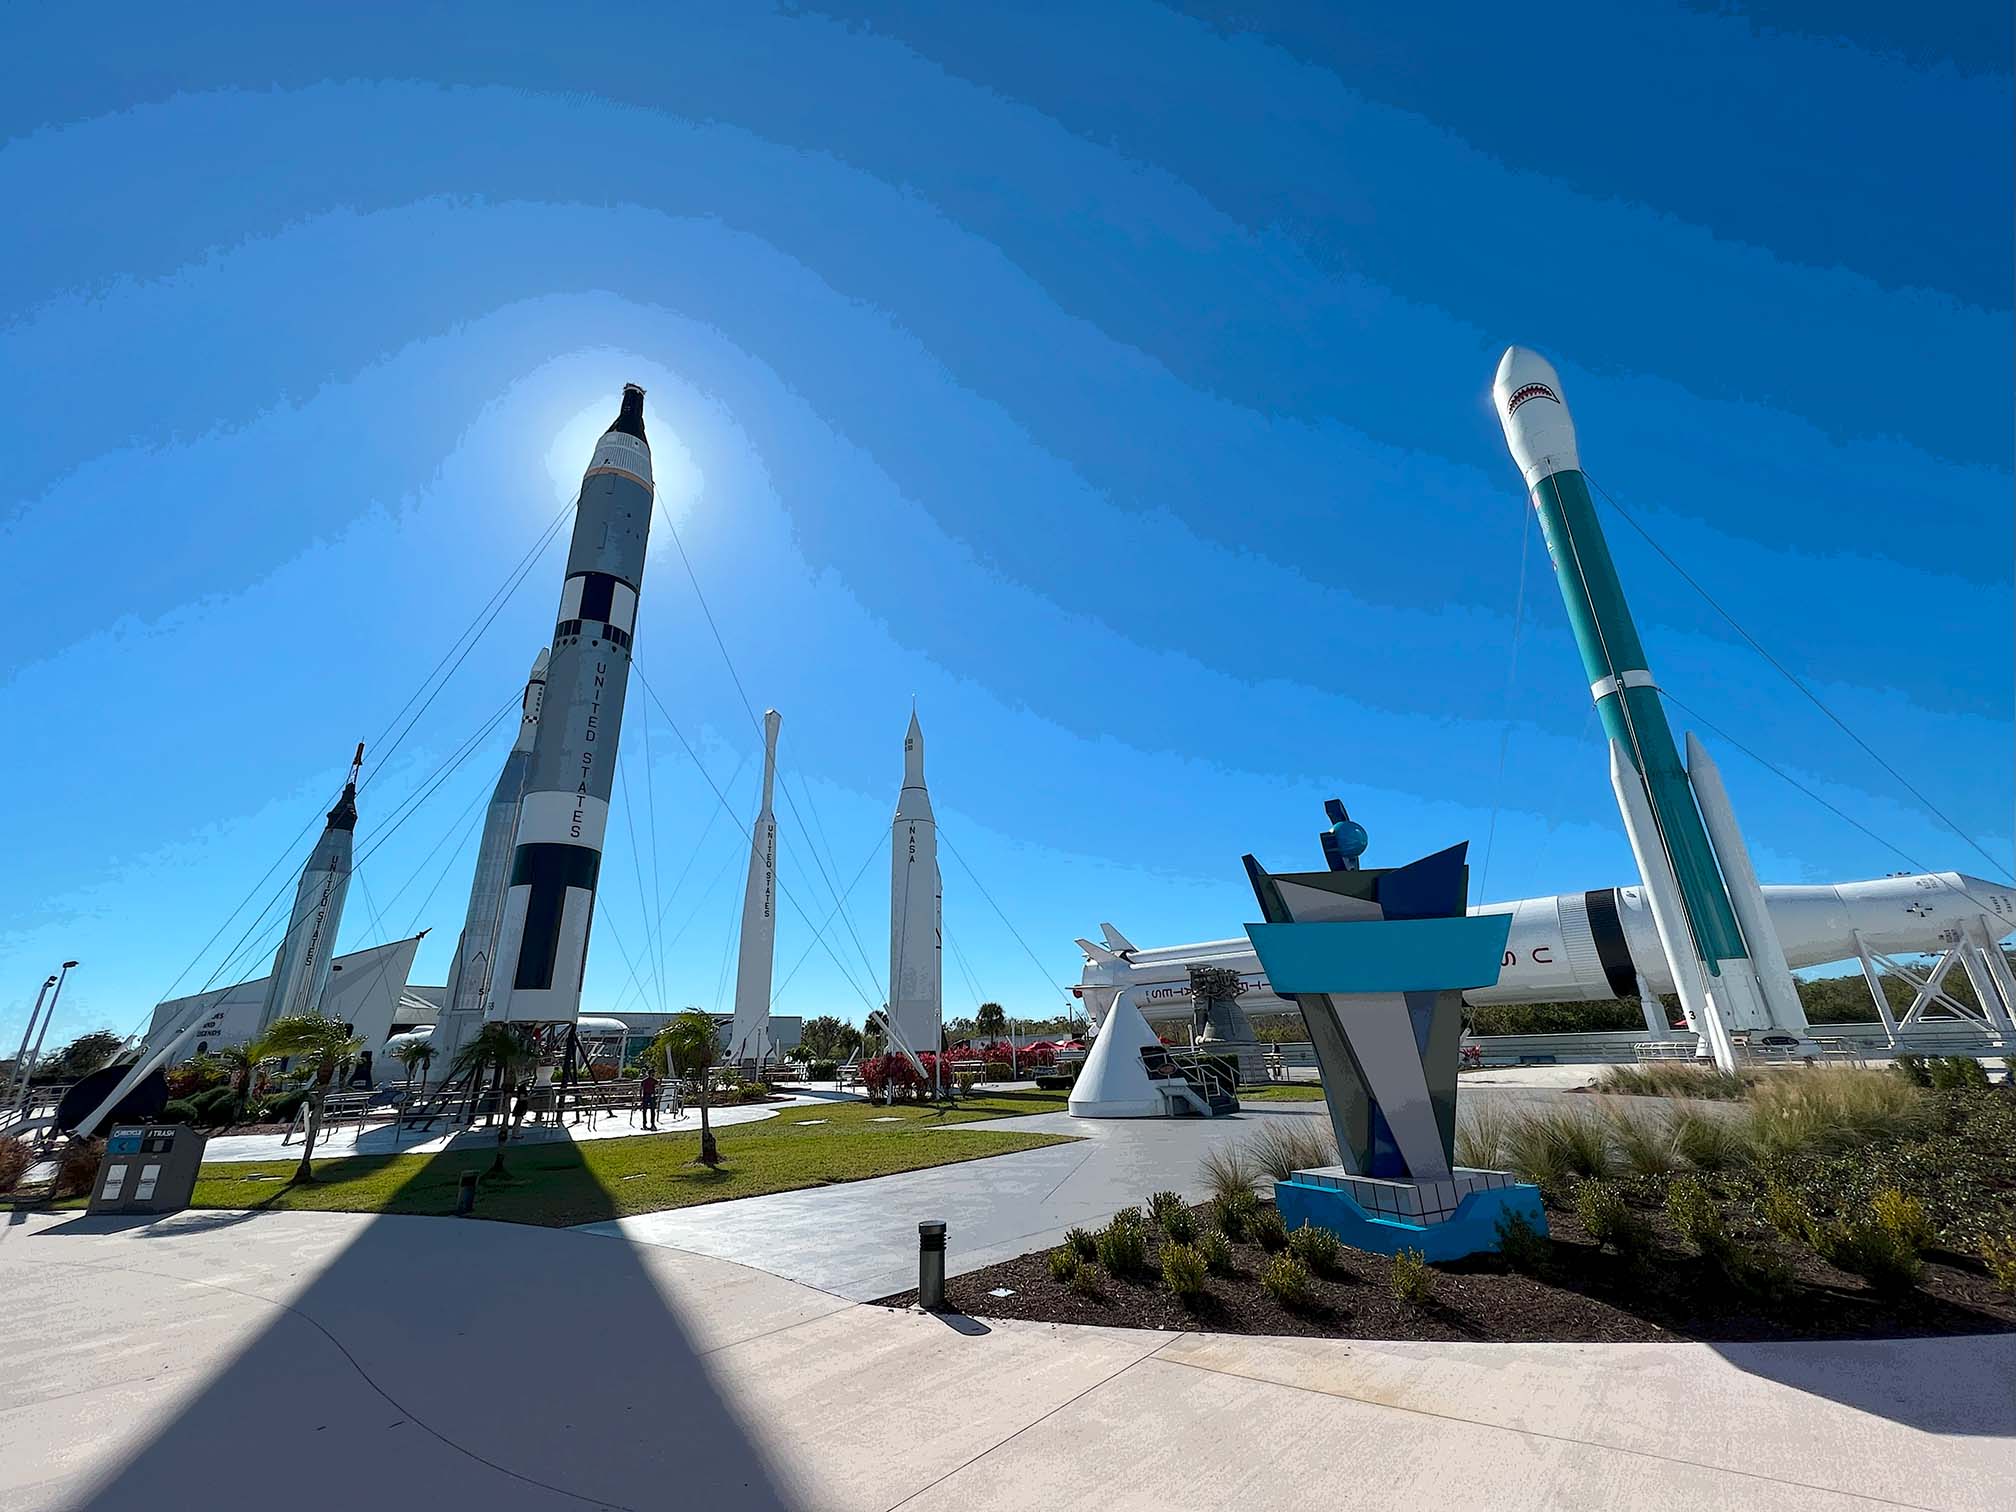 Space rockets on display outside museum